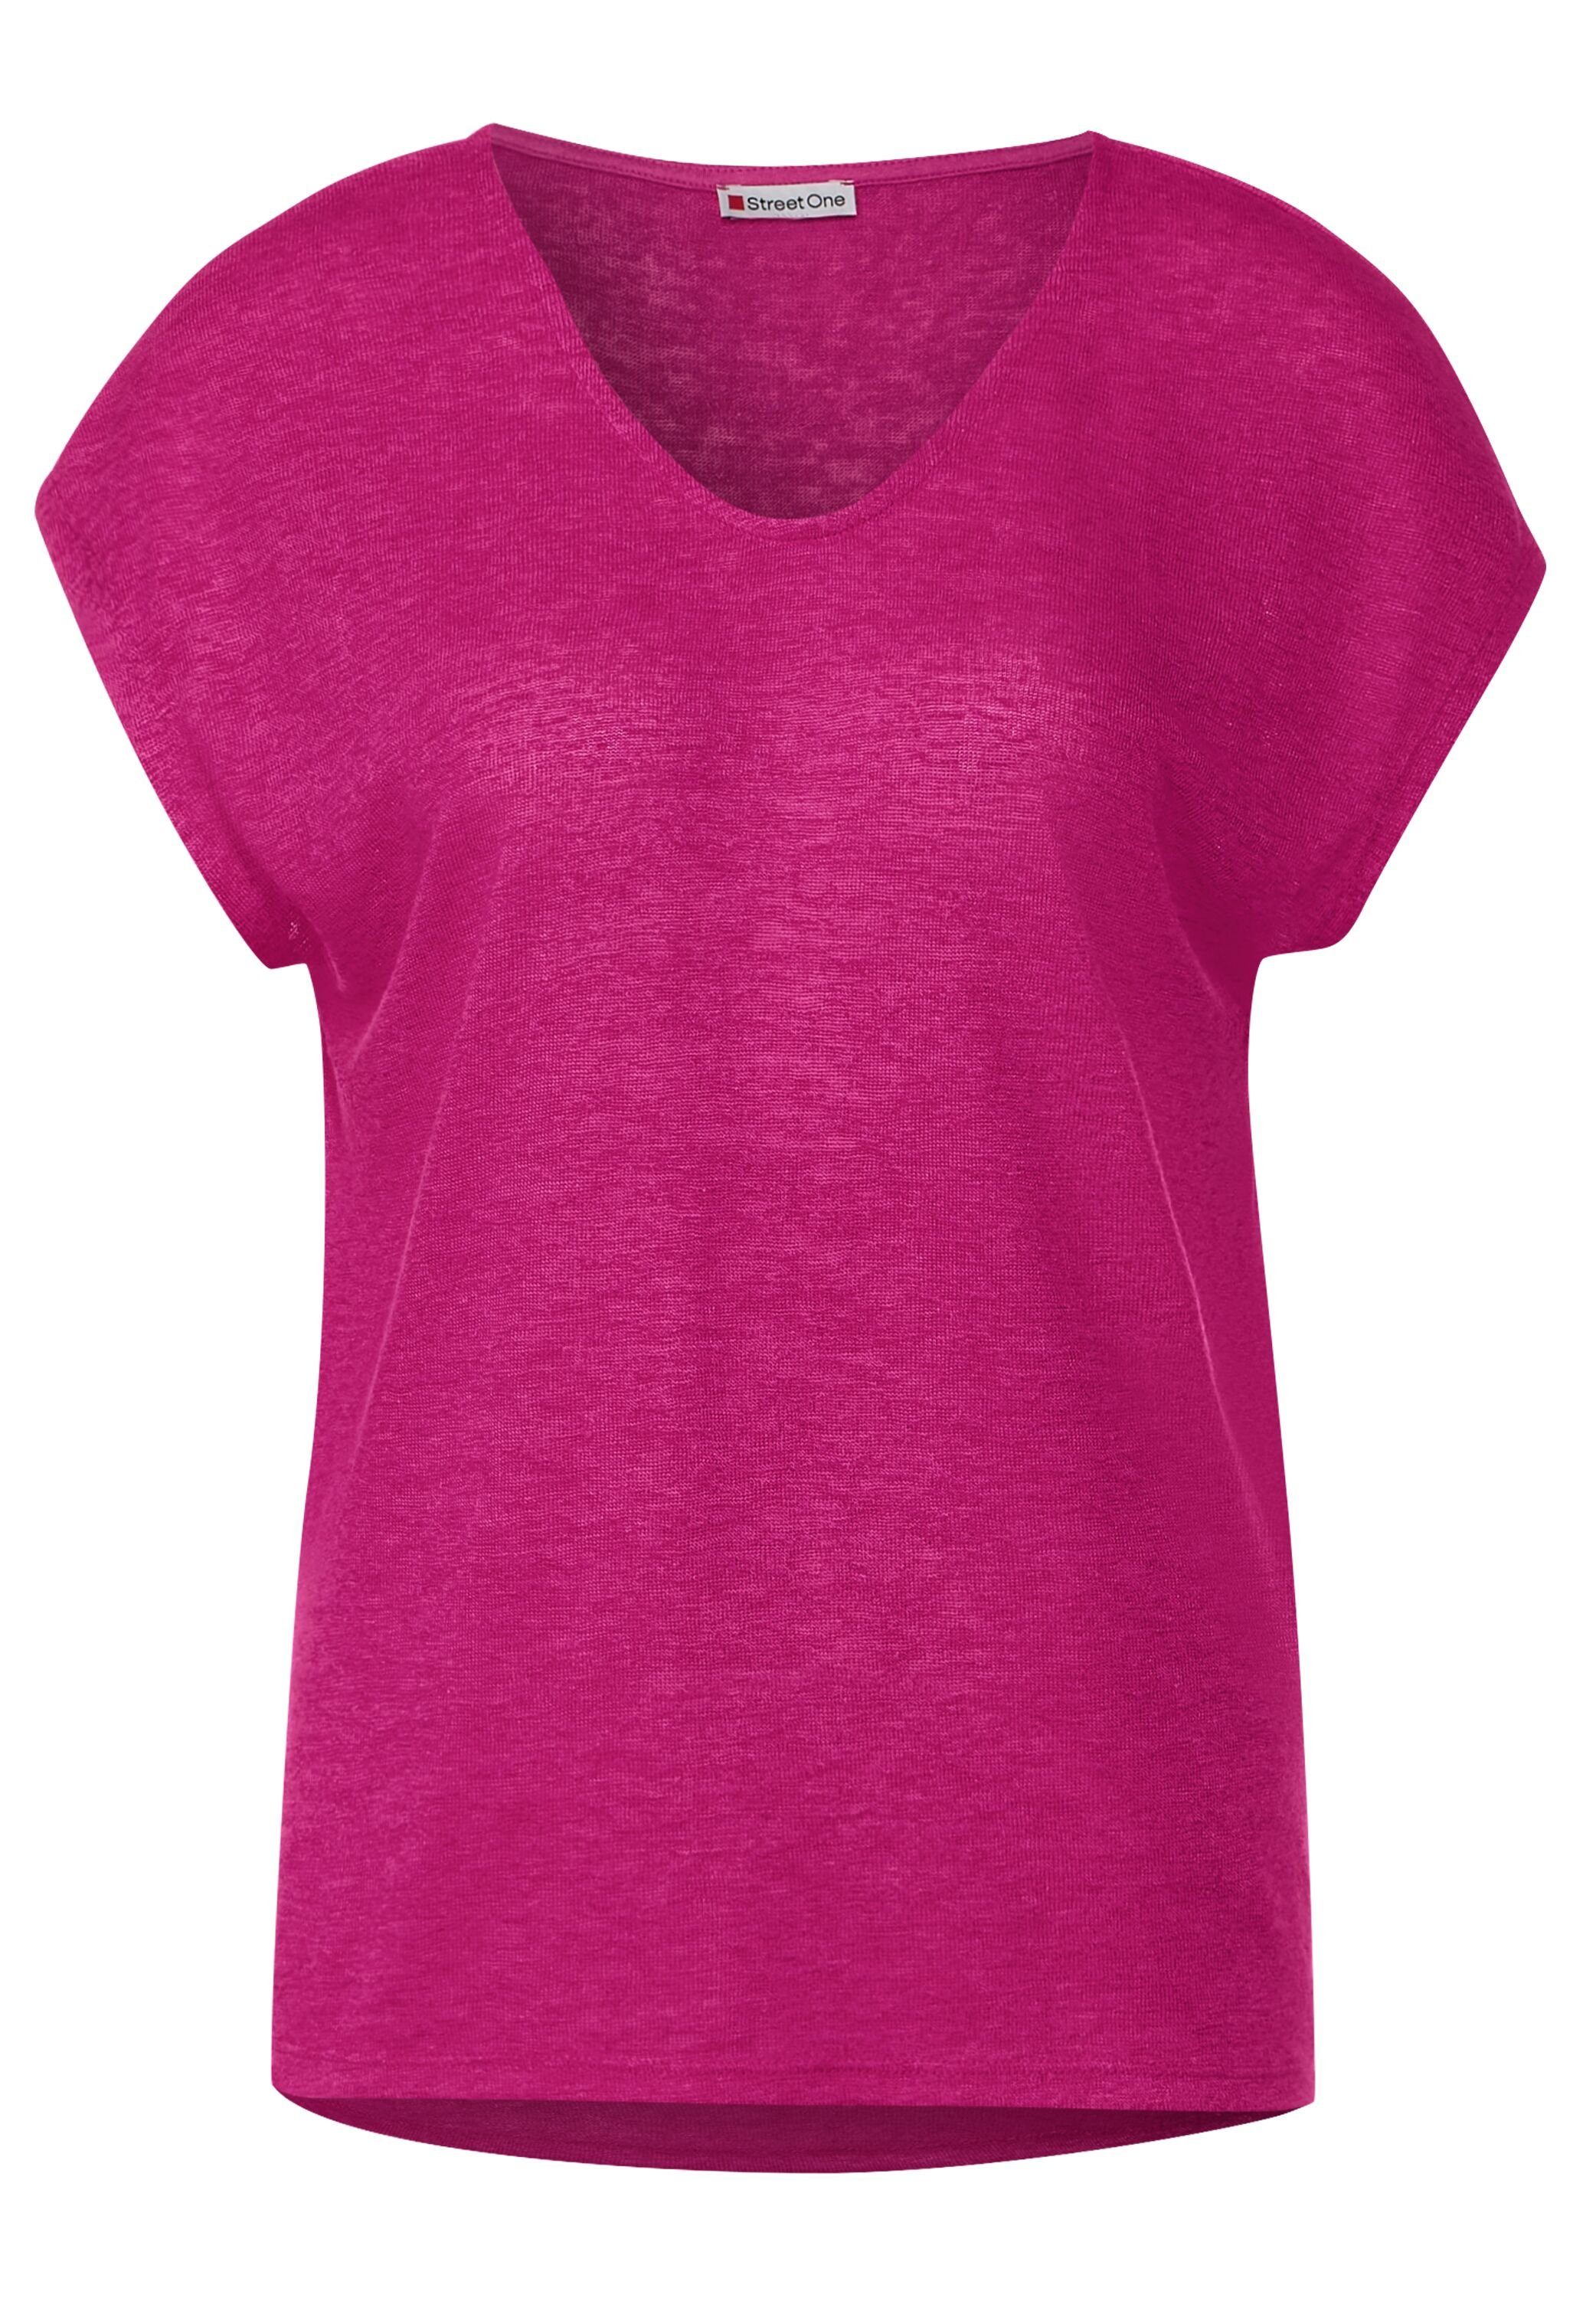 STREET oasis in V-Shirt ONE Unifarbe pink